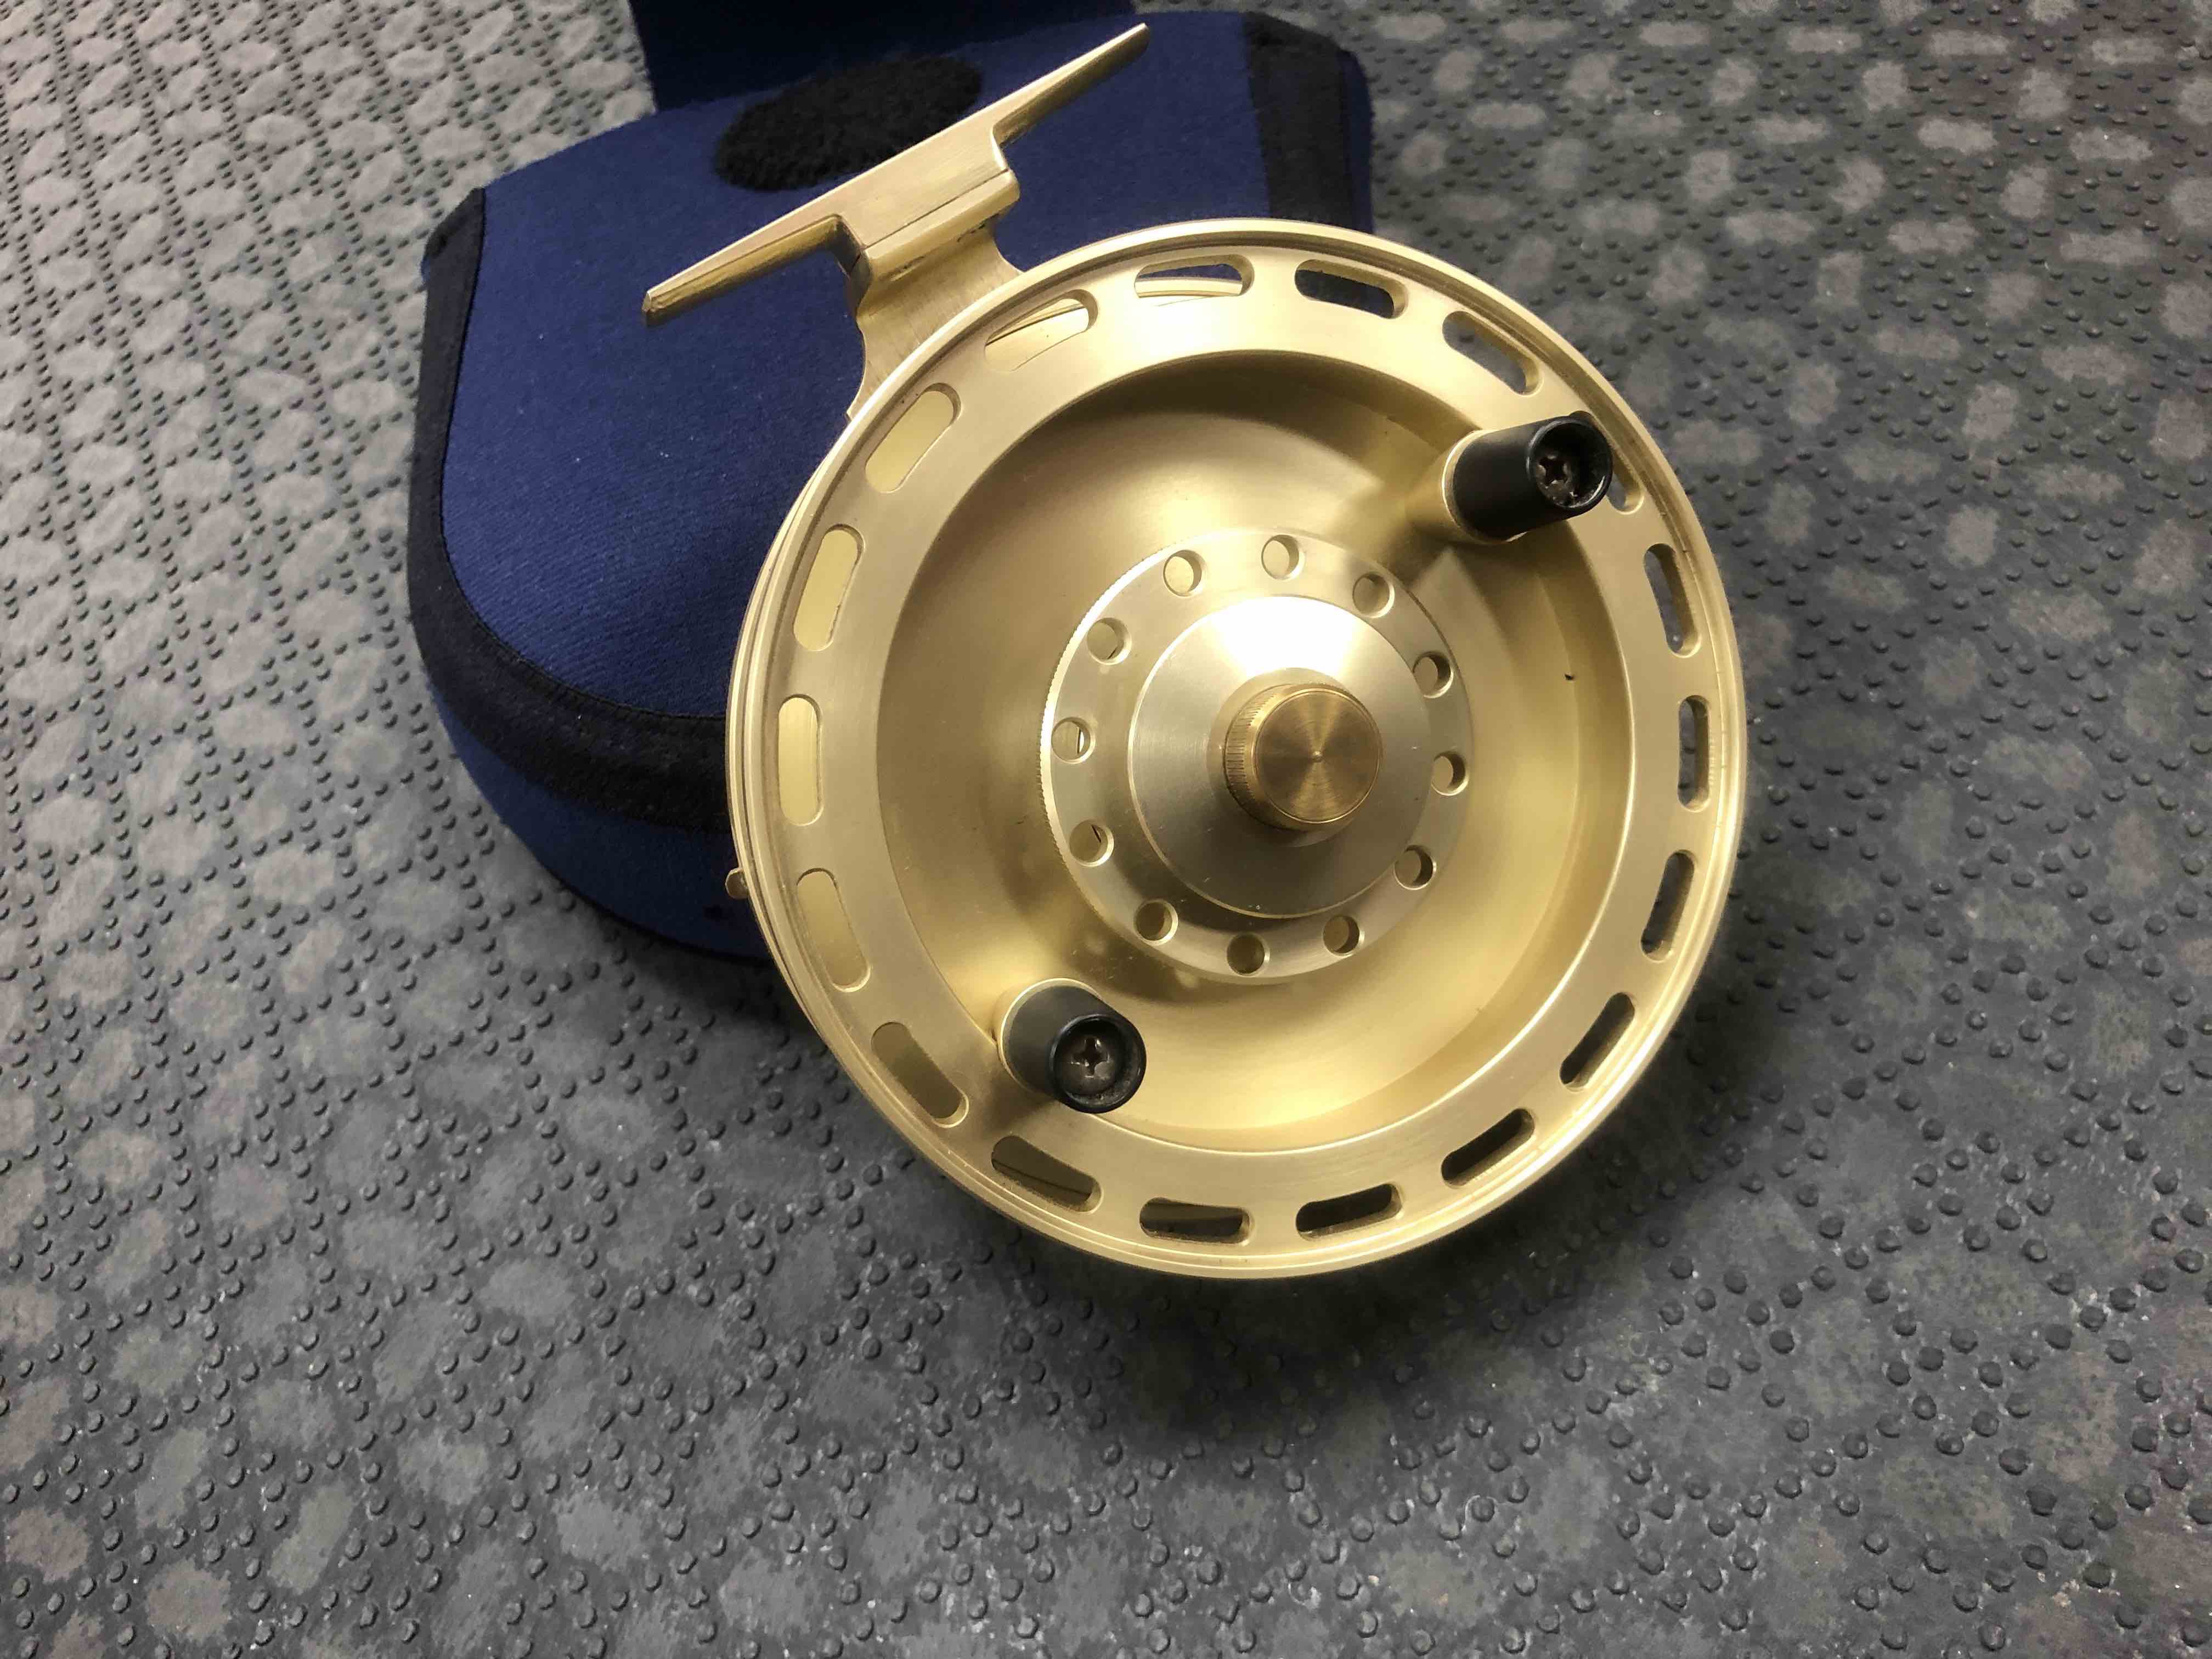 https://thefirstcast.ca/wp-content/uploads/2019/11/Spar-Centerpin-Float-Reel-cw-drag-Limited-Number-4AA.jpg